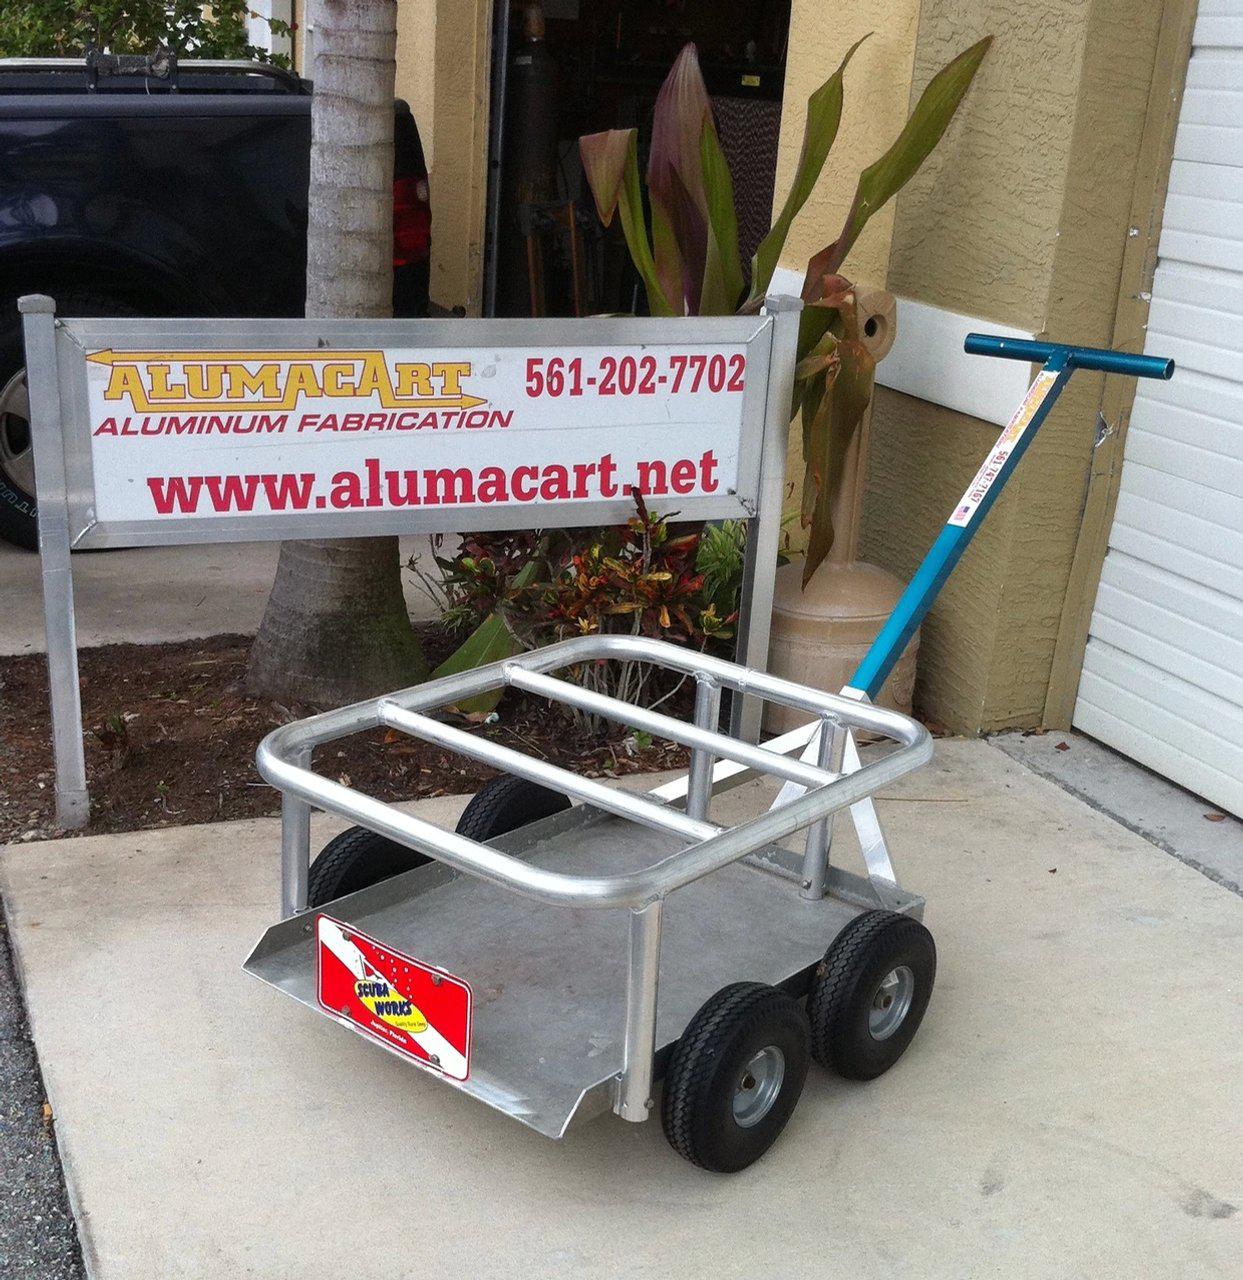 Alumacart Scuba Niner Package-Hauls NINE Dive Tanks - LEAD TIME TO SHIP 10 TO 12 BUSINESS DAYS